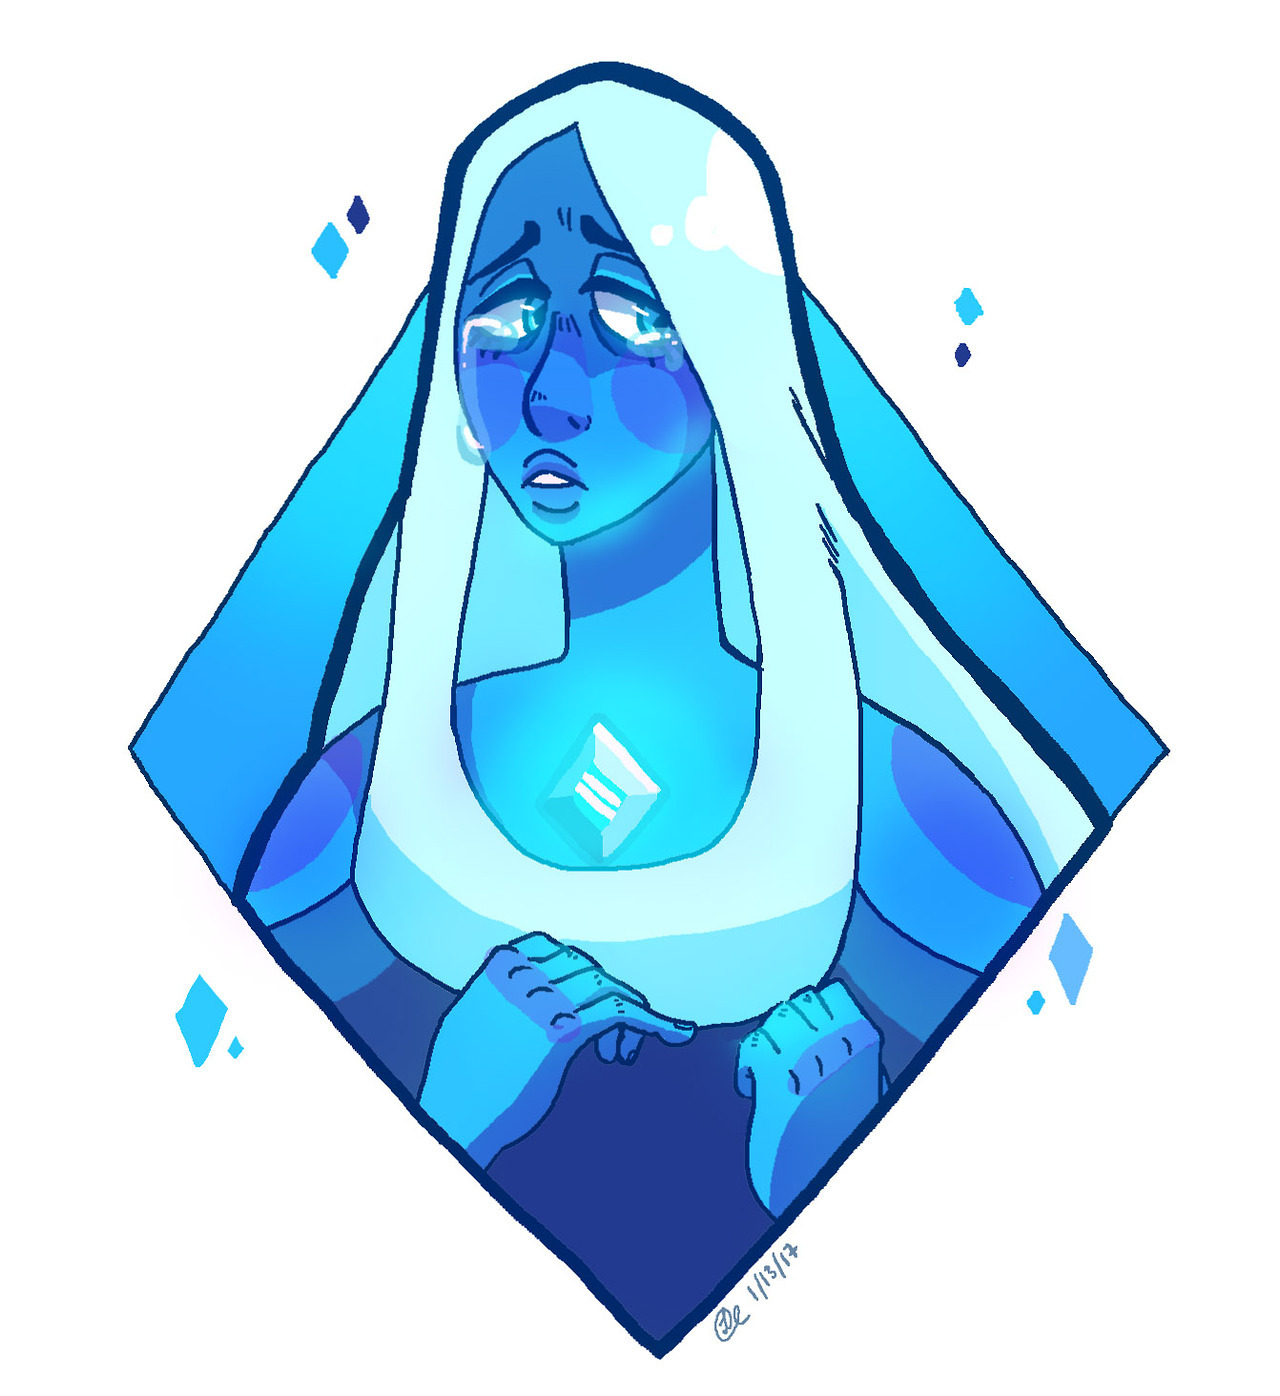 Blue Diamond! I meant to write 2018, haha. That new year adjustment period!